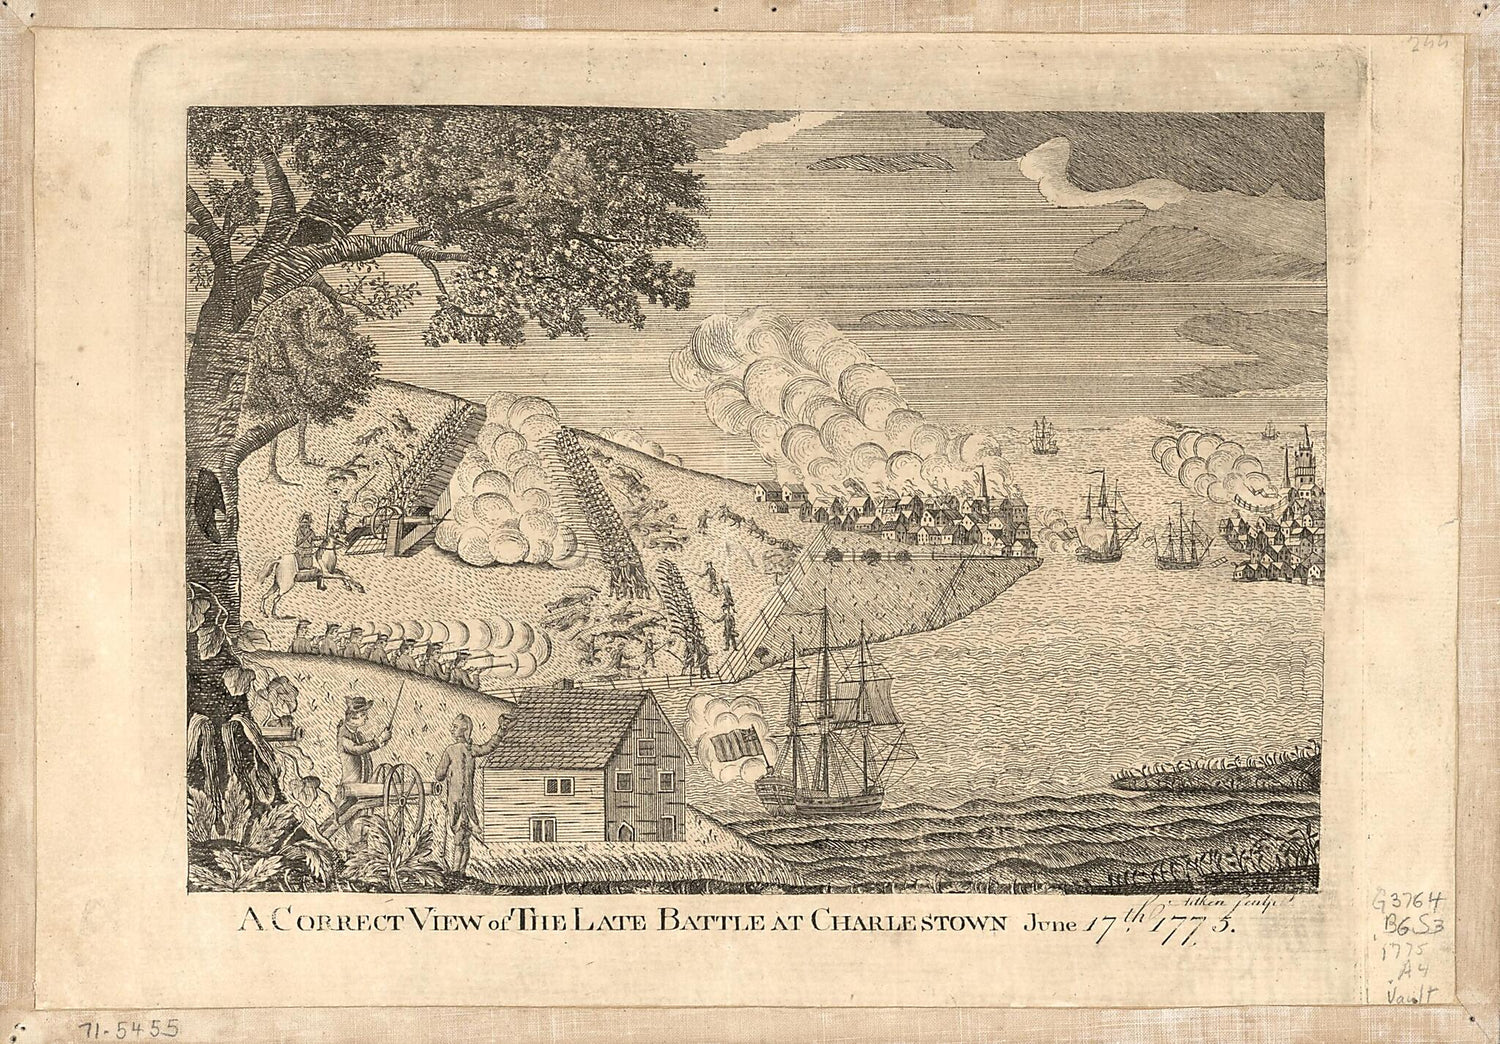 This old map of A Correct View of the Late Battle at Charlestown : June 17th, from 1775 (Correct View of the Late Battle at Charlestown) was created by Robert Aitken in 1775